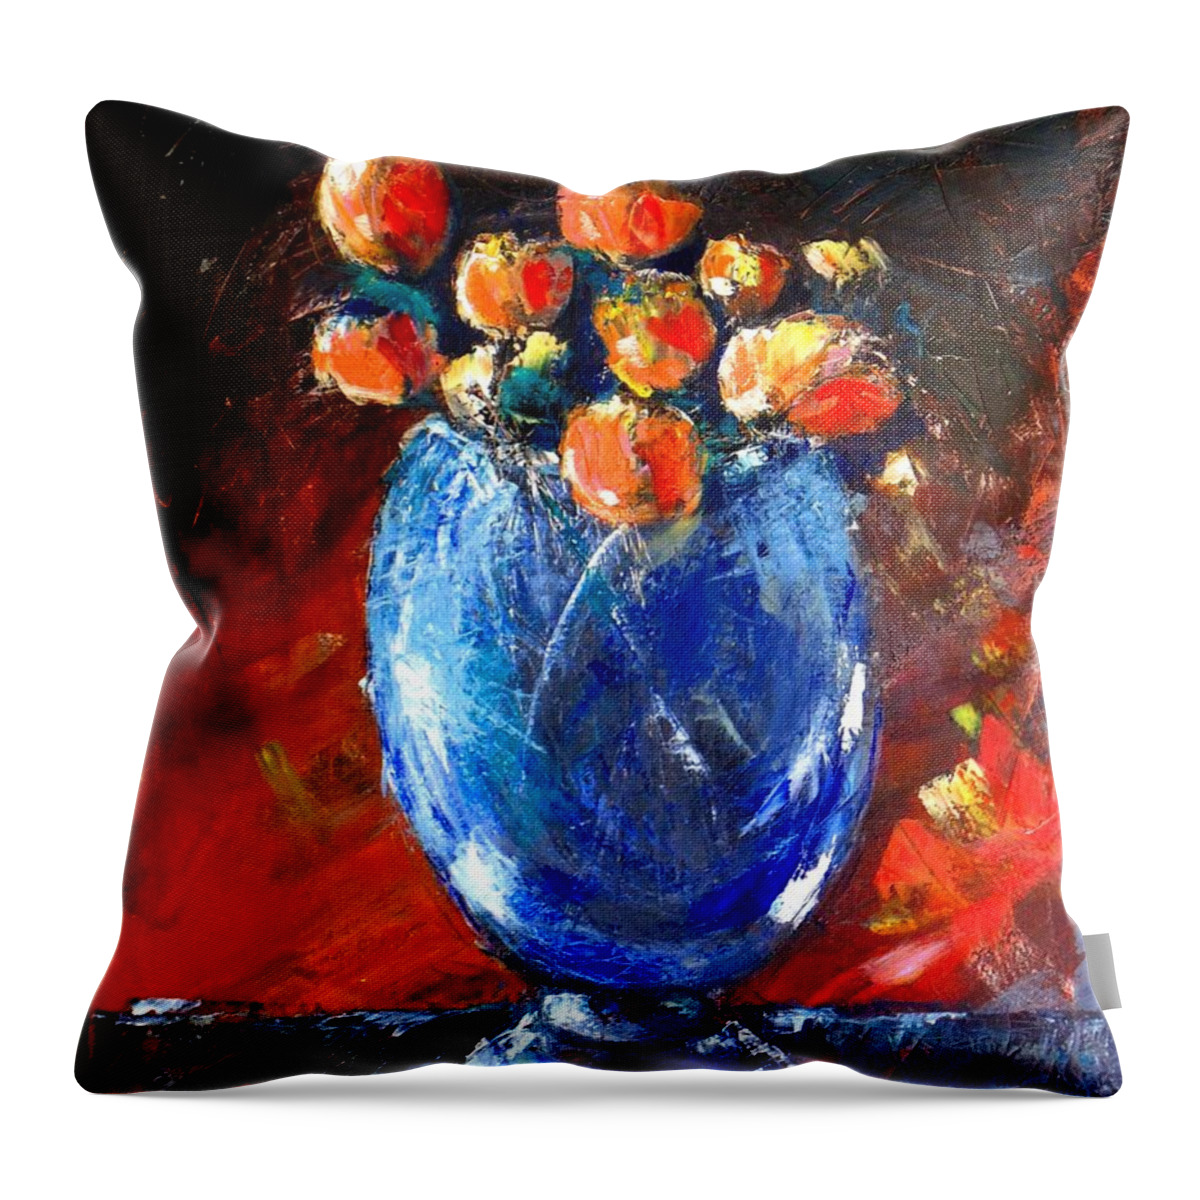 Vase Throw Pillow featuring the painting Vaso 2 by Marcello Cicchini